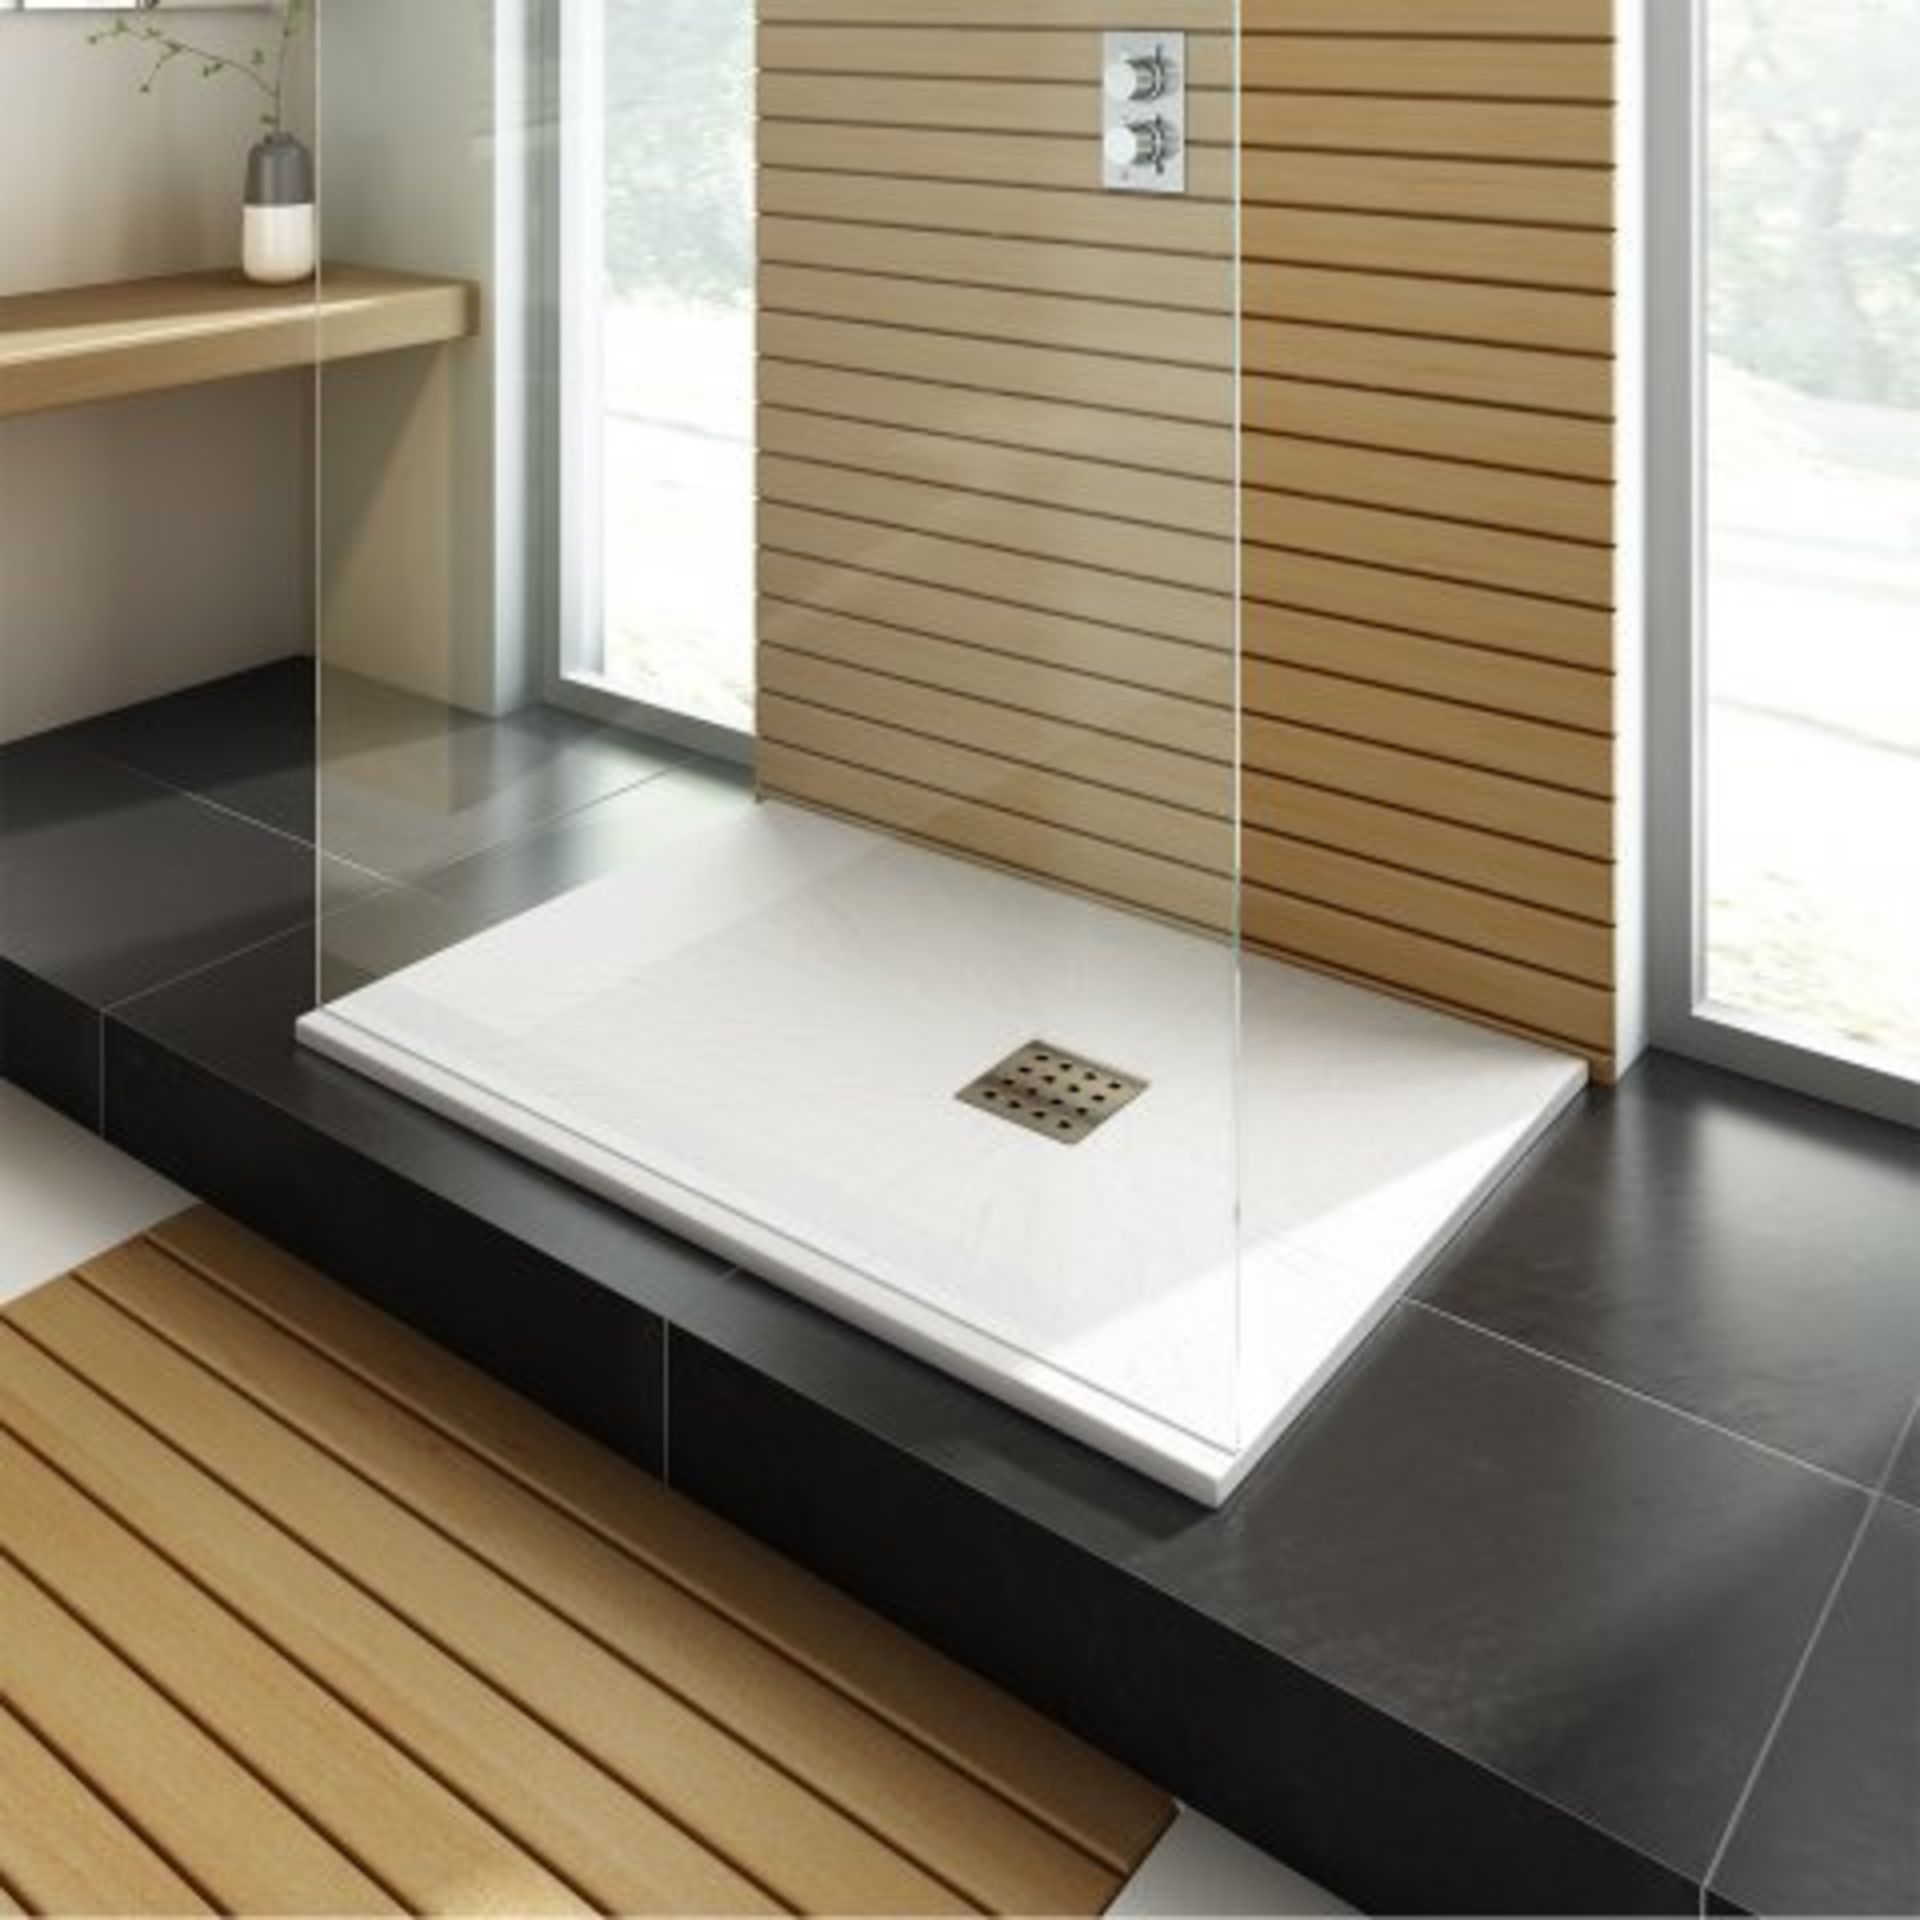 New & Boxed 1200x800mm Rectangular White Slate Effect Shower Tray. RRP £499.99. Hand Crafted ...